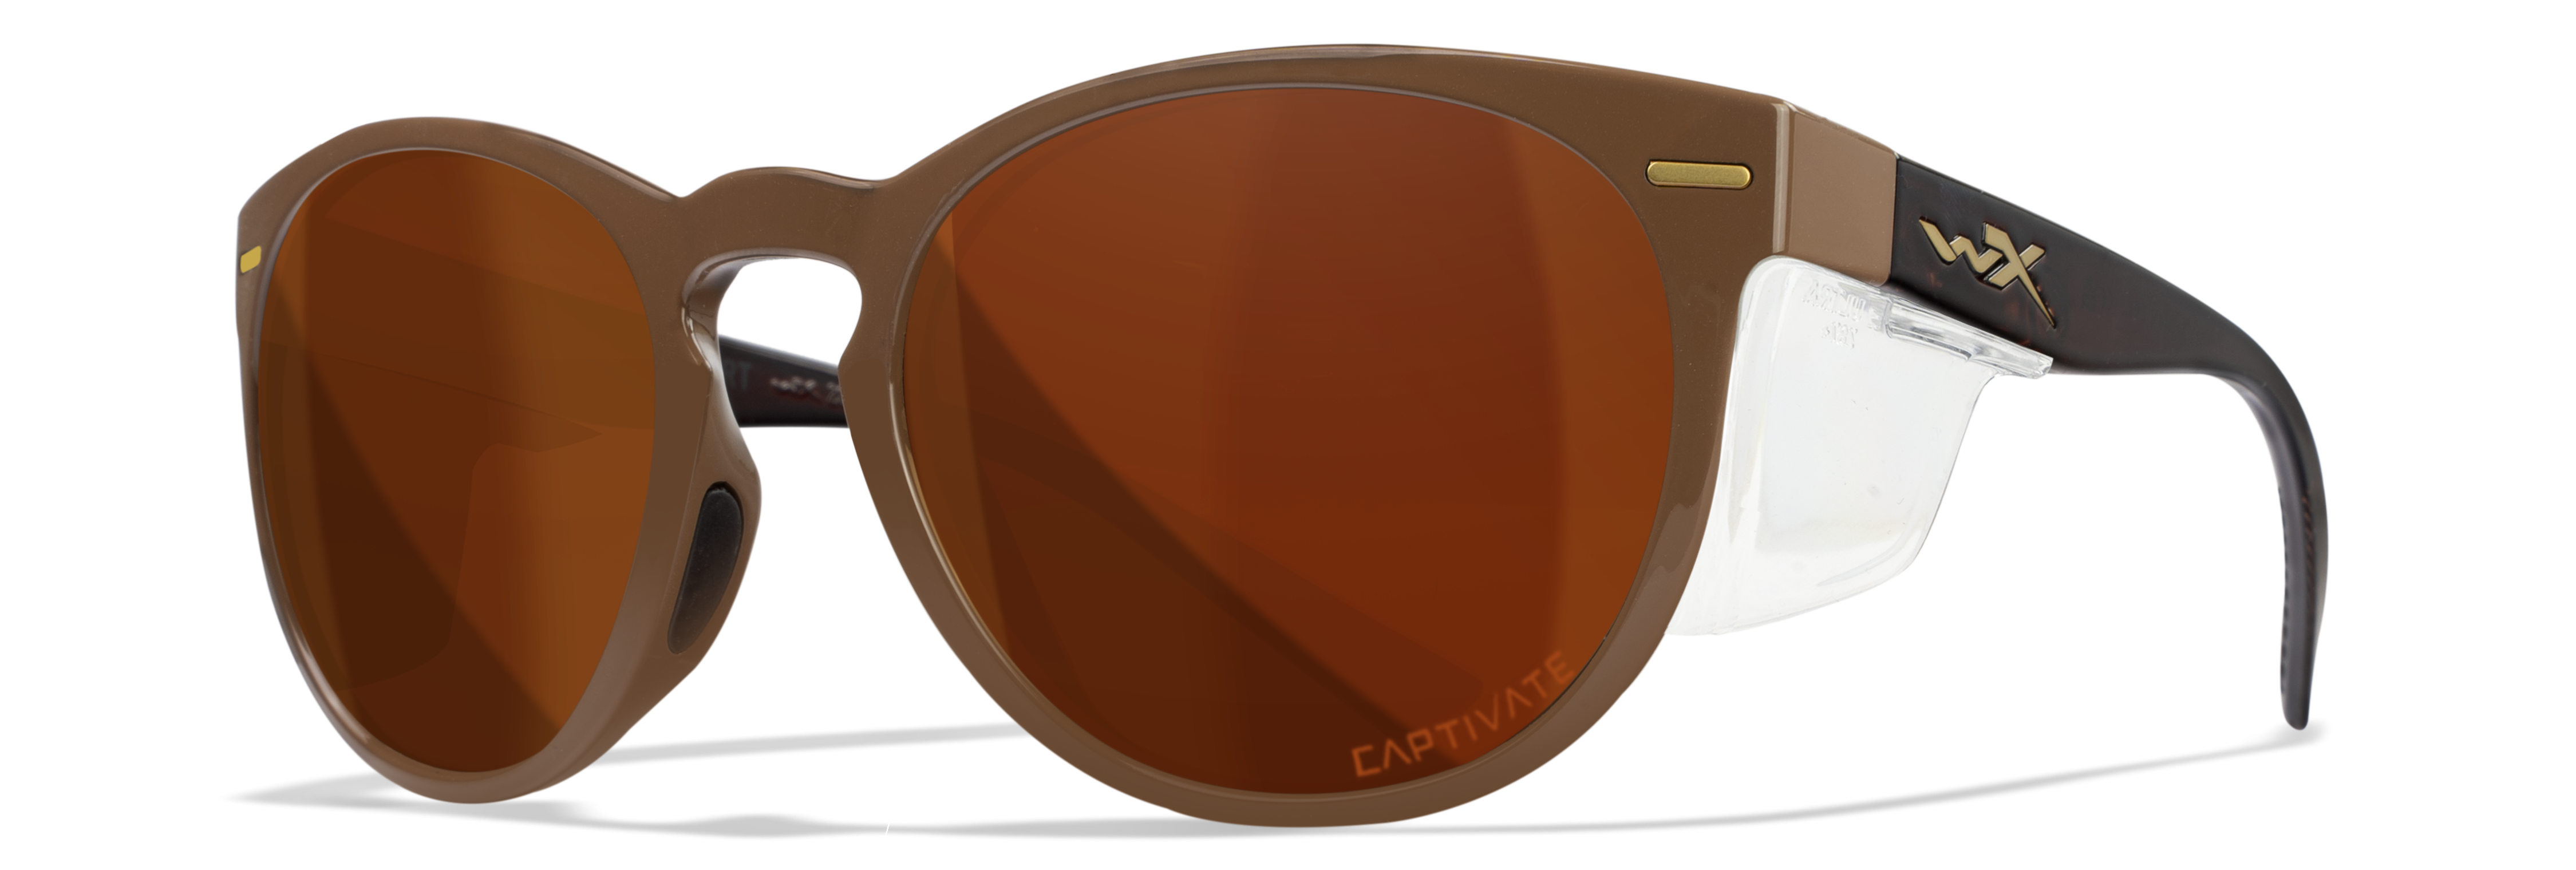 Wiley-X-COVERT-Captivate-Polarized-Copper-Gloss-CoffeeCrystal-Brown-Frame-CarpStore.pl-Europe-Online-Carp-Shop-5